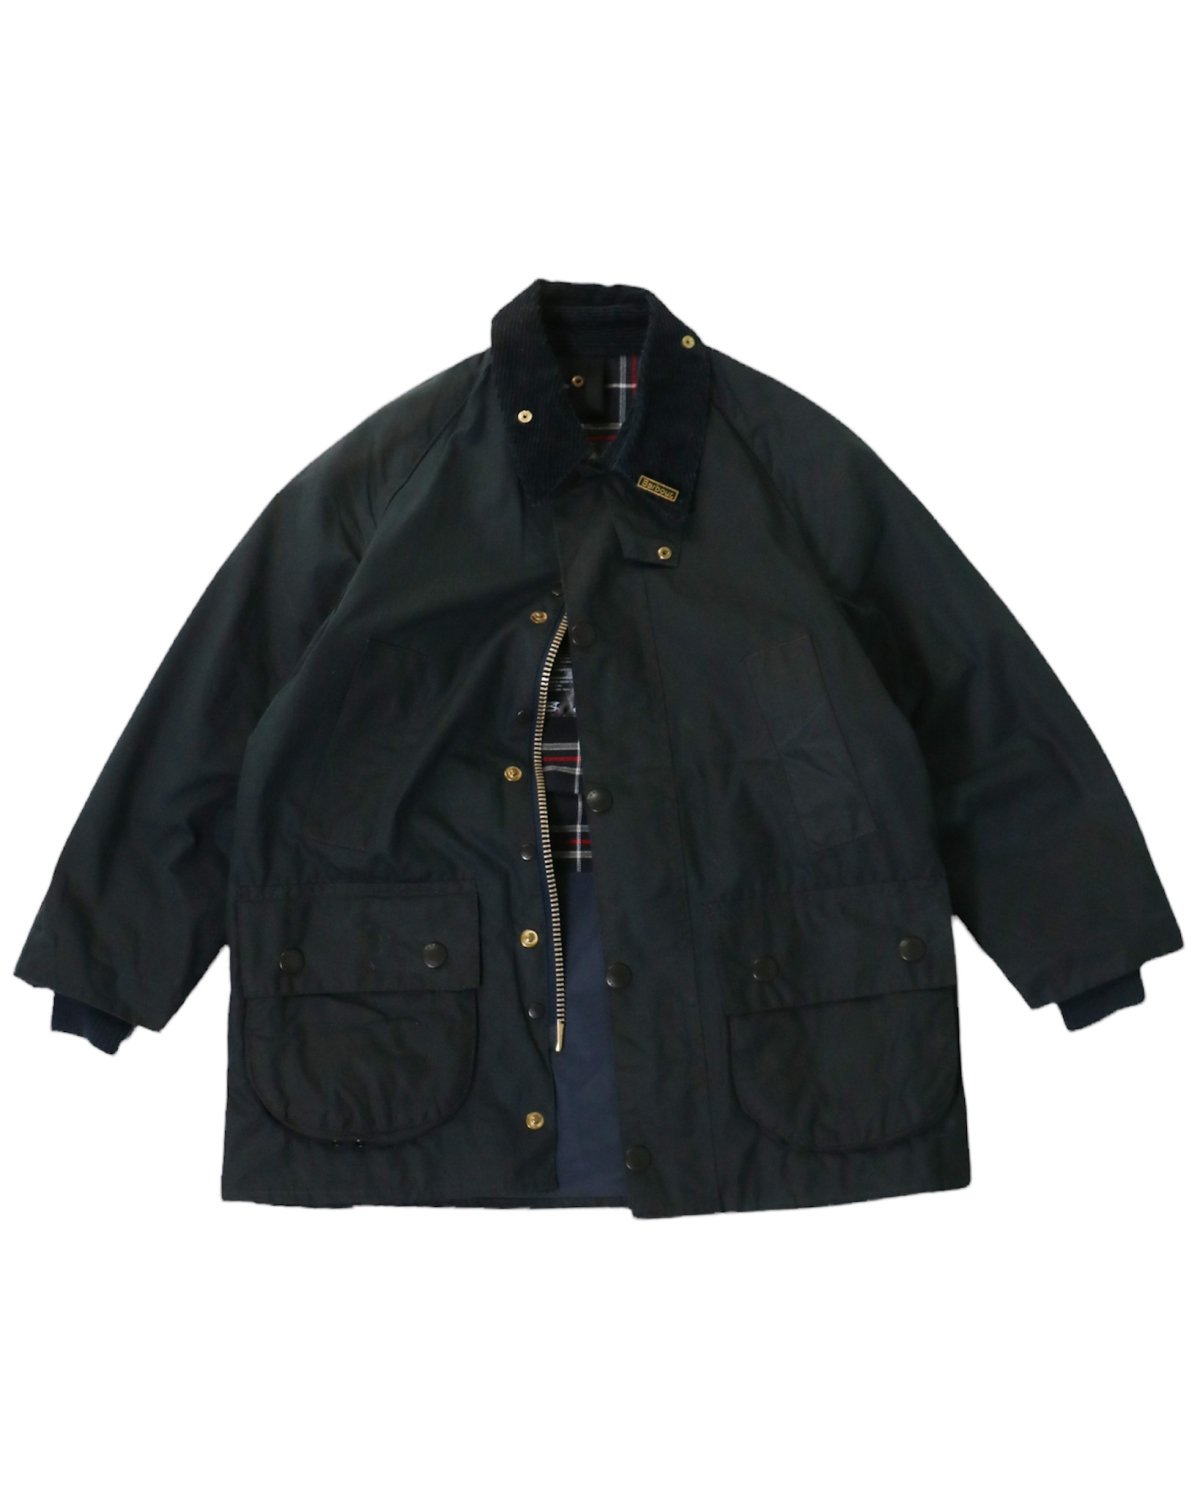 I&I 古着 通販 “Barbour” BEDALE 詳細画像